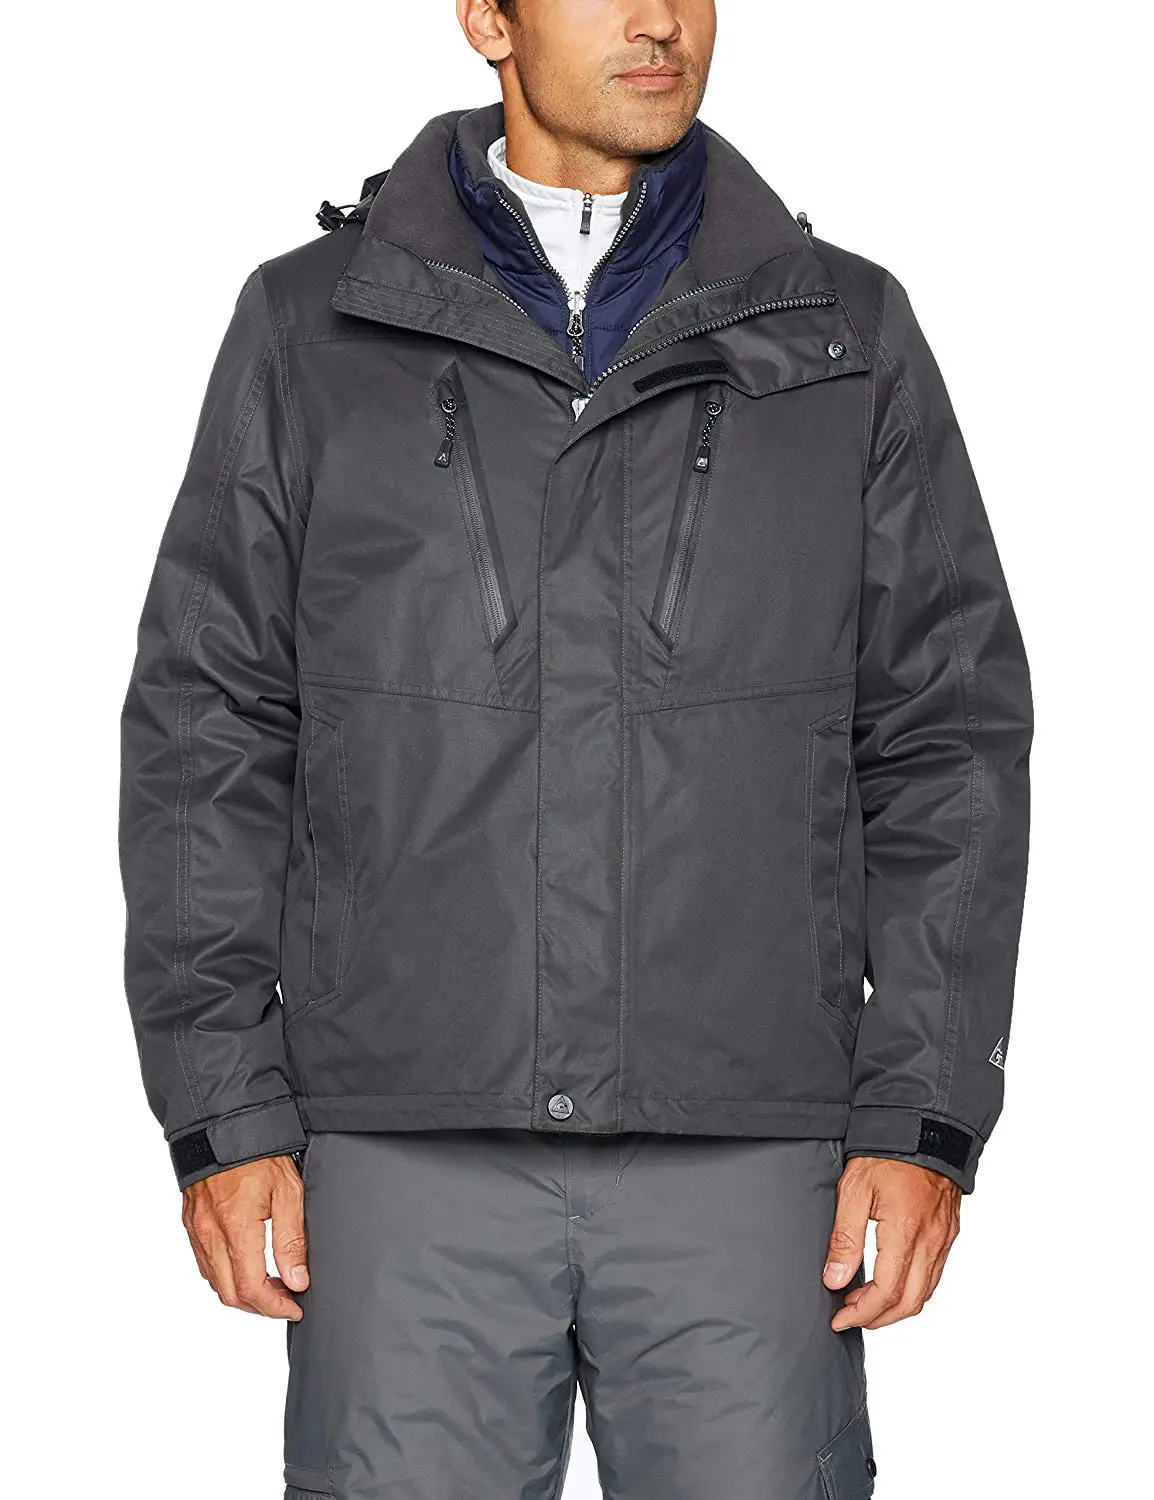 Cheap Gerry Jacket, find Gerry Jacket deals on line at Alibaba.com